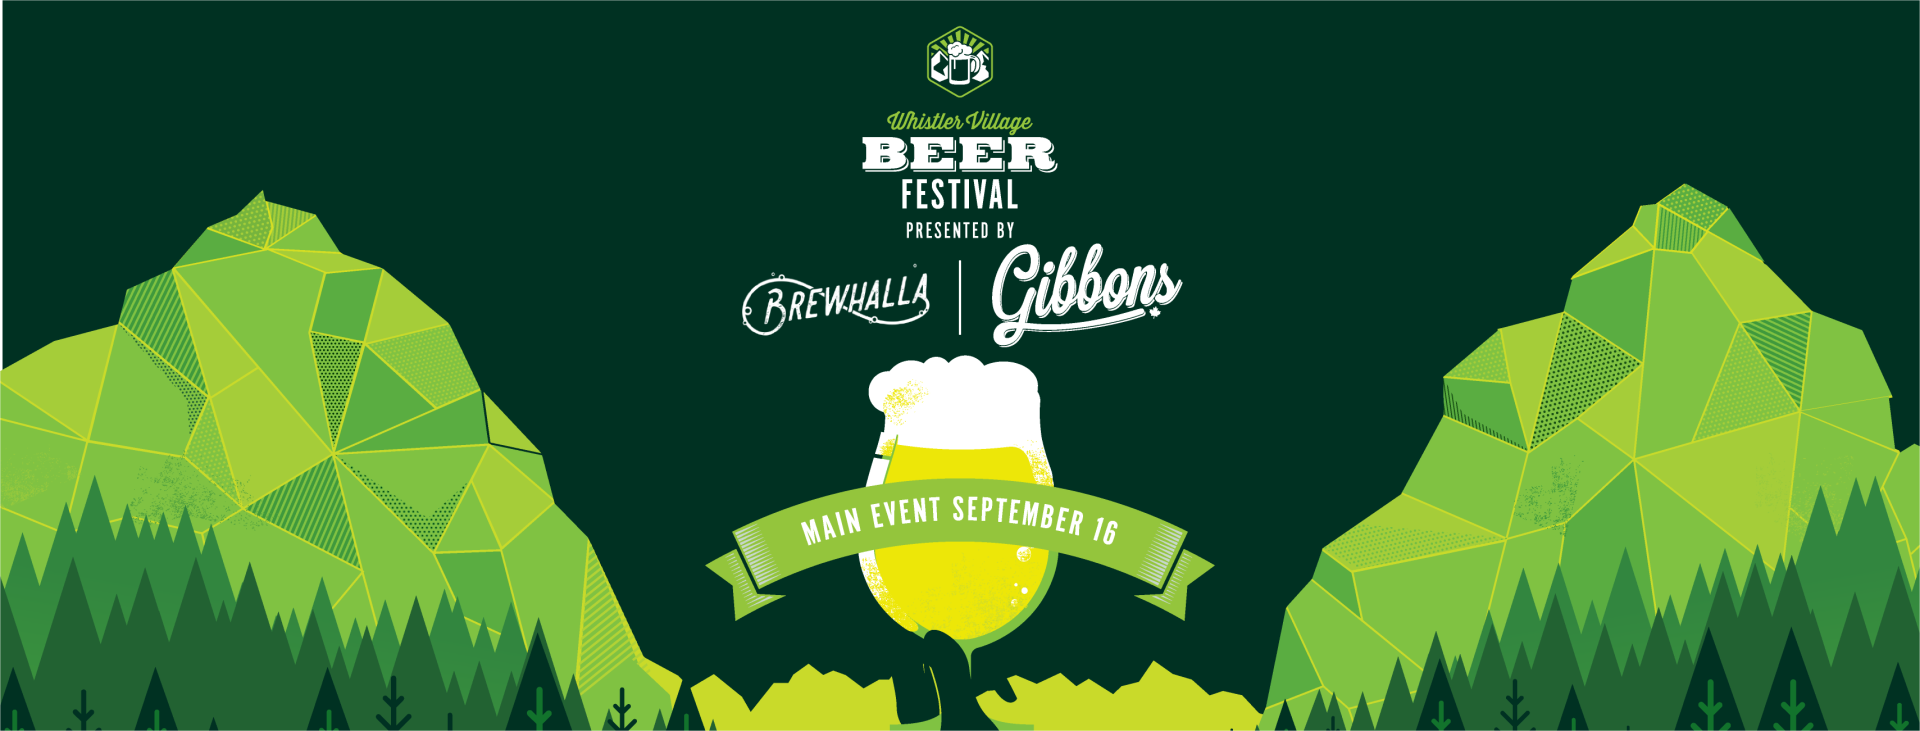 Whistler Village Beer Festival, presented by Gibbons Whistler and Brewhalla, Main Event